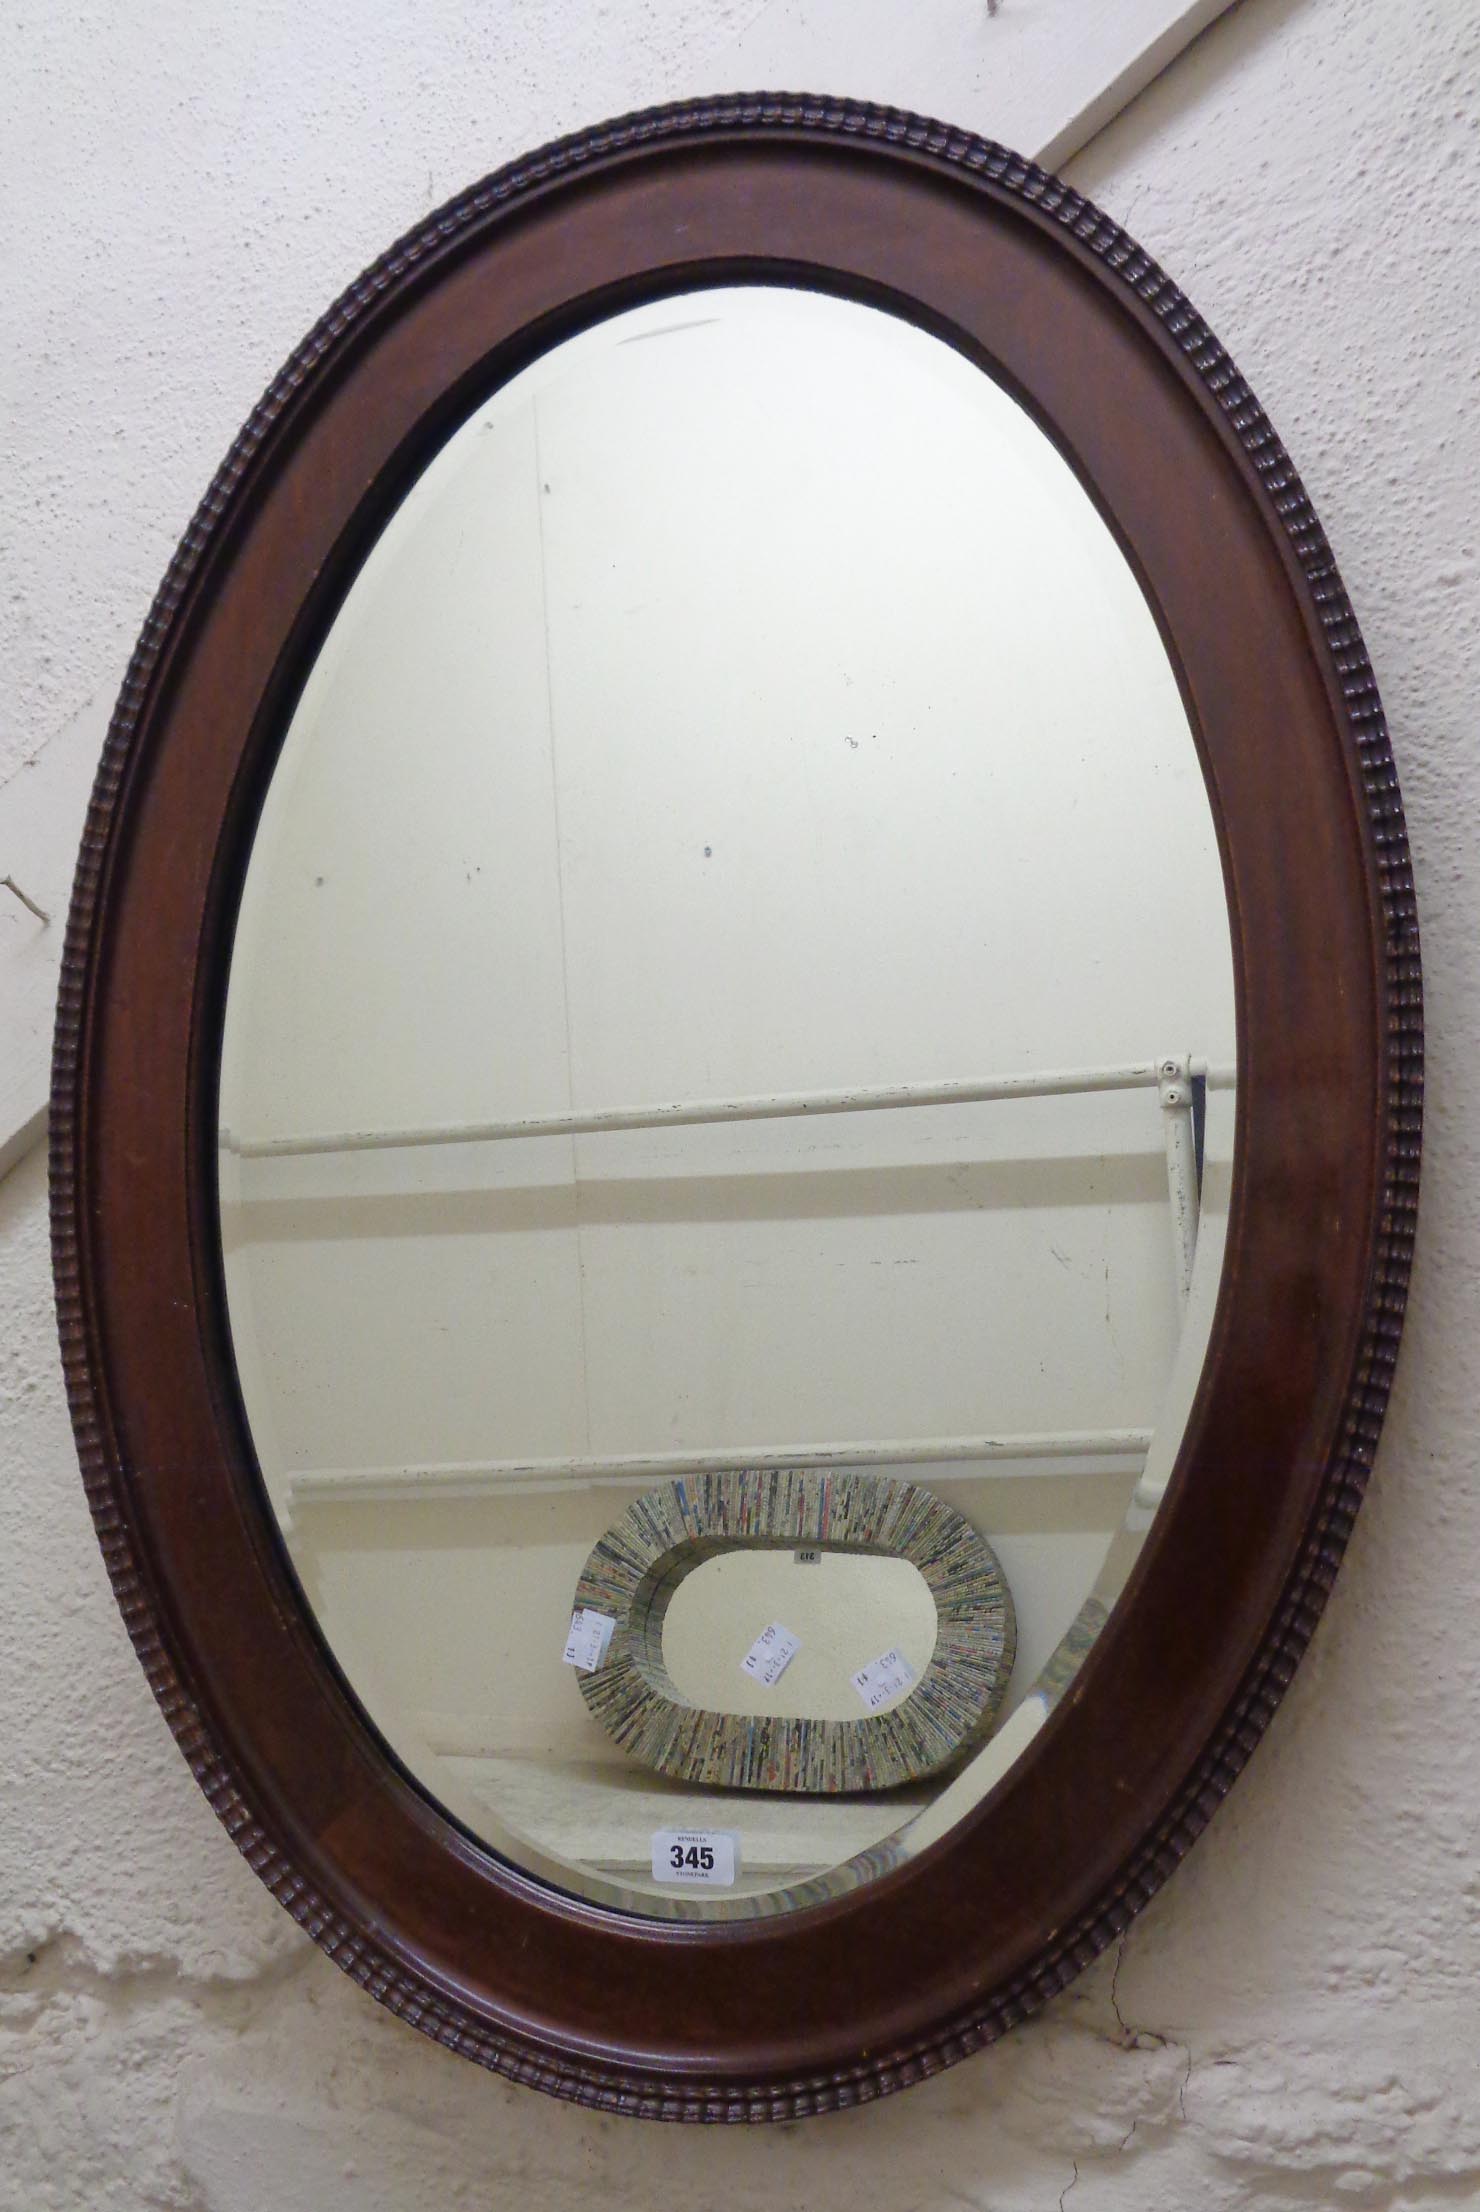 An early 20th Century moulded walnut framed bevelled oval wall mirror